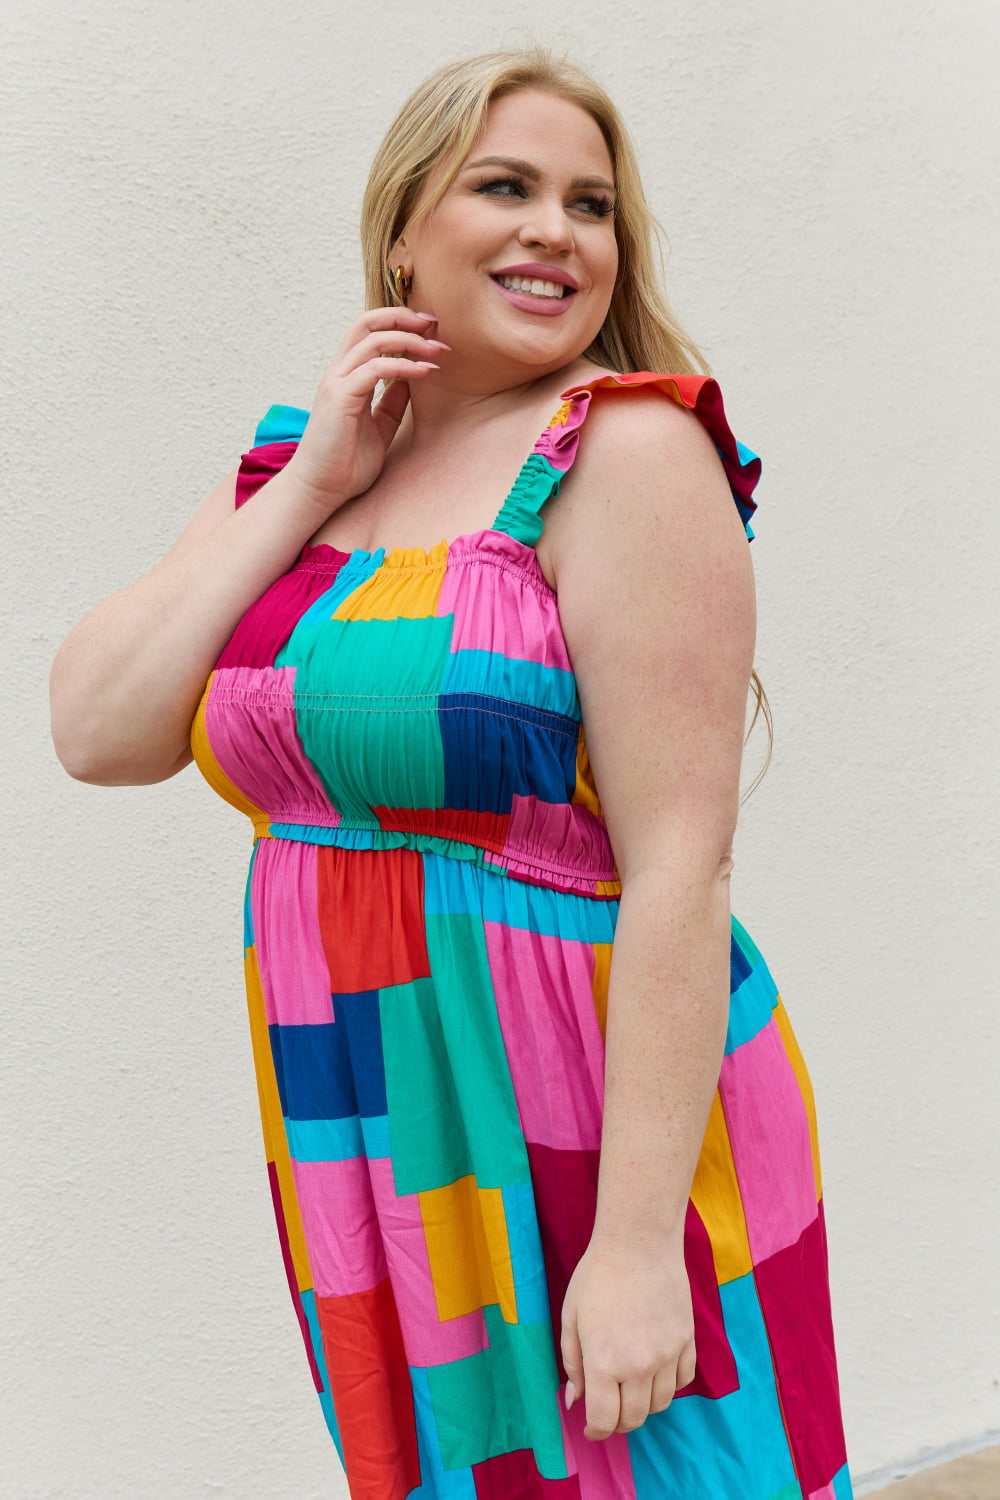 Multicolored Square Print Summer Dress up to 3XL - Shell Design Boutique